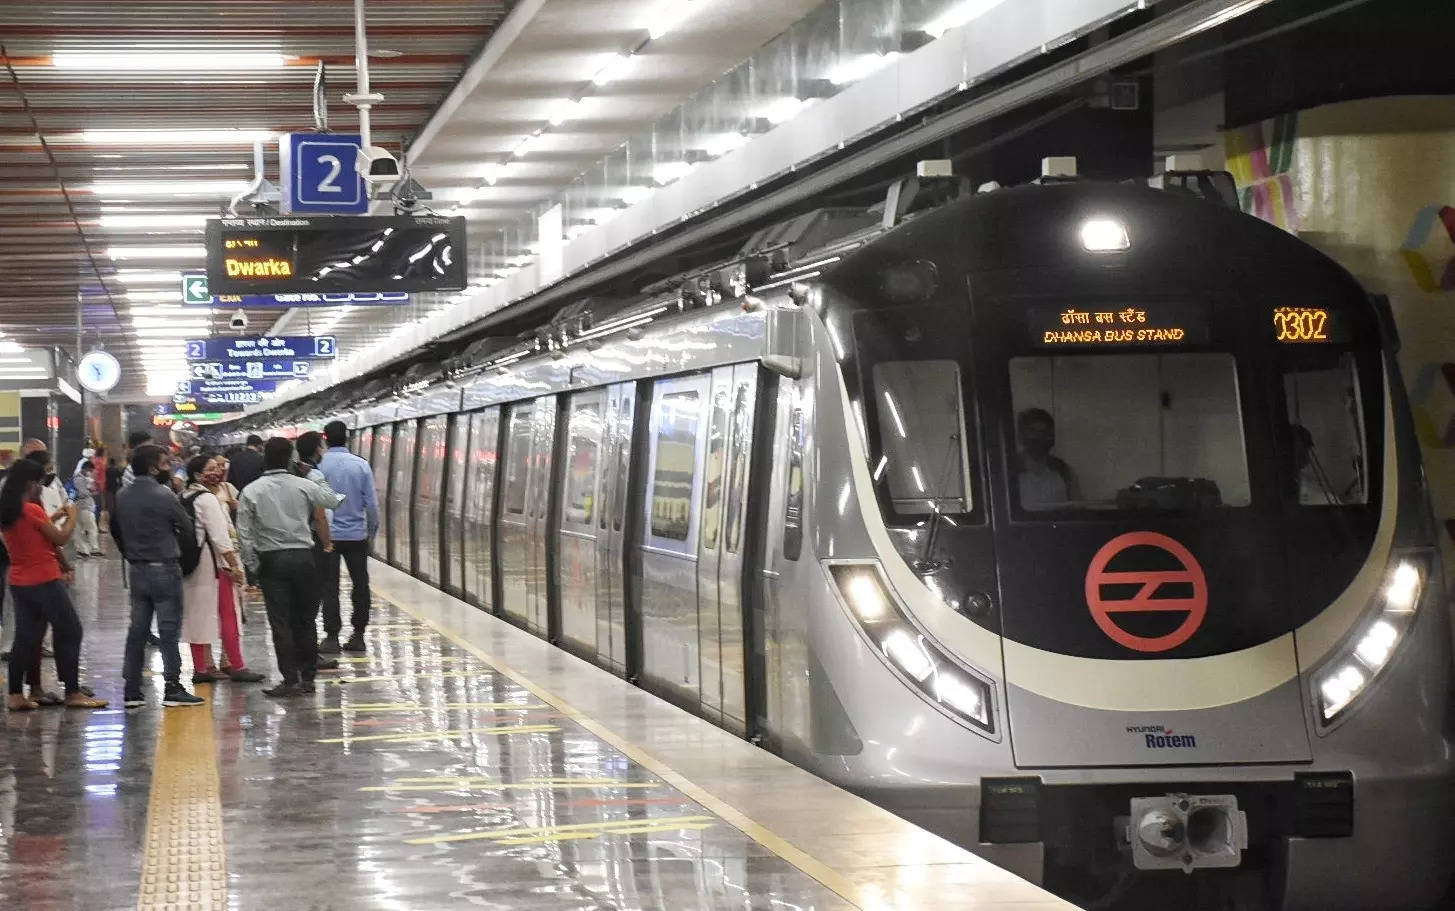 <p>New Delhi, Sep 4 (IANS) The Delhi Metro has launched special 'Tourist Smart Cards', offering "unlimited rides" in the metro network in two categories, which will be available for sale from Monday at selected Metro stations.</p>